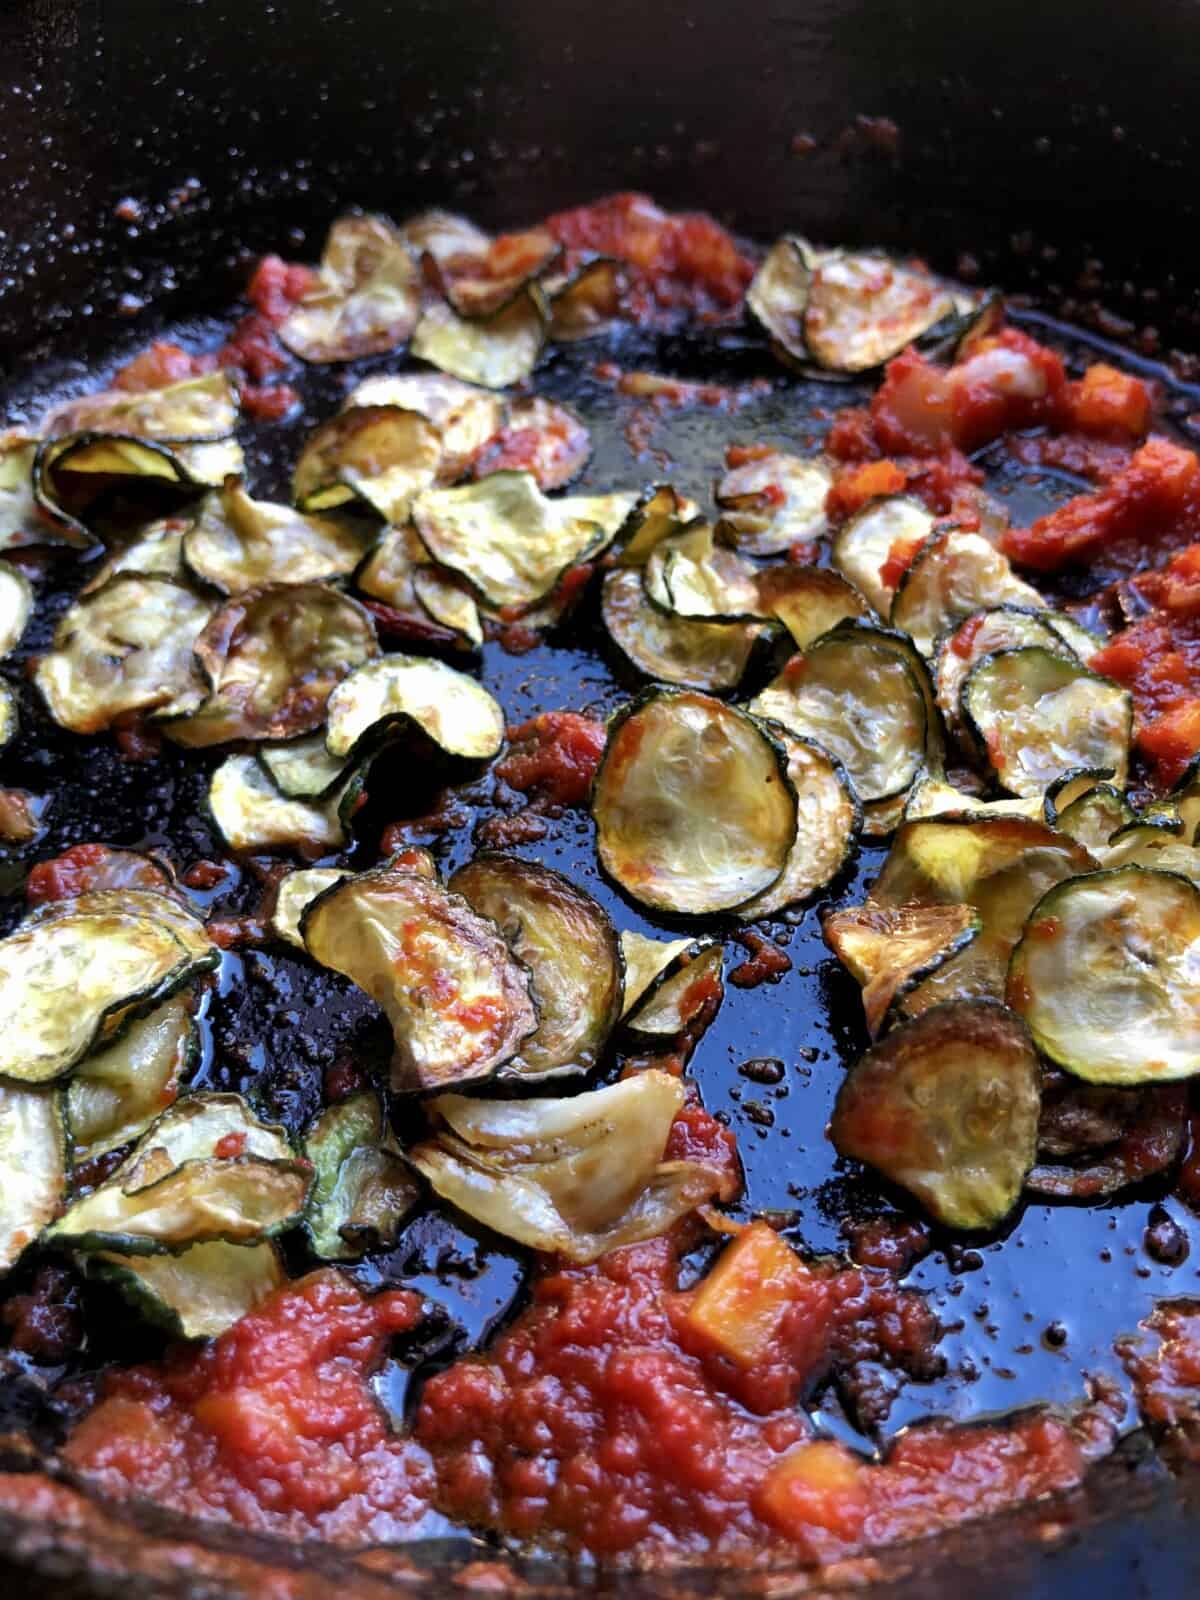 Lightly fried zucchini and tomatoes in a skillet to make the paccheri pasta sauce.